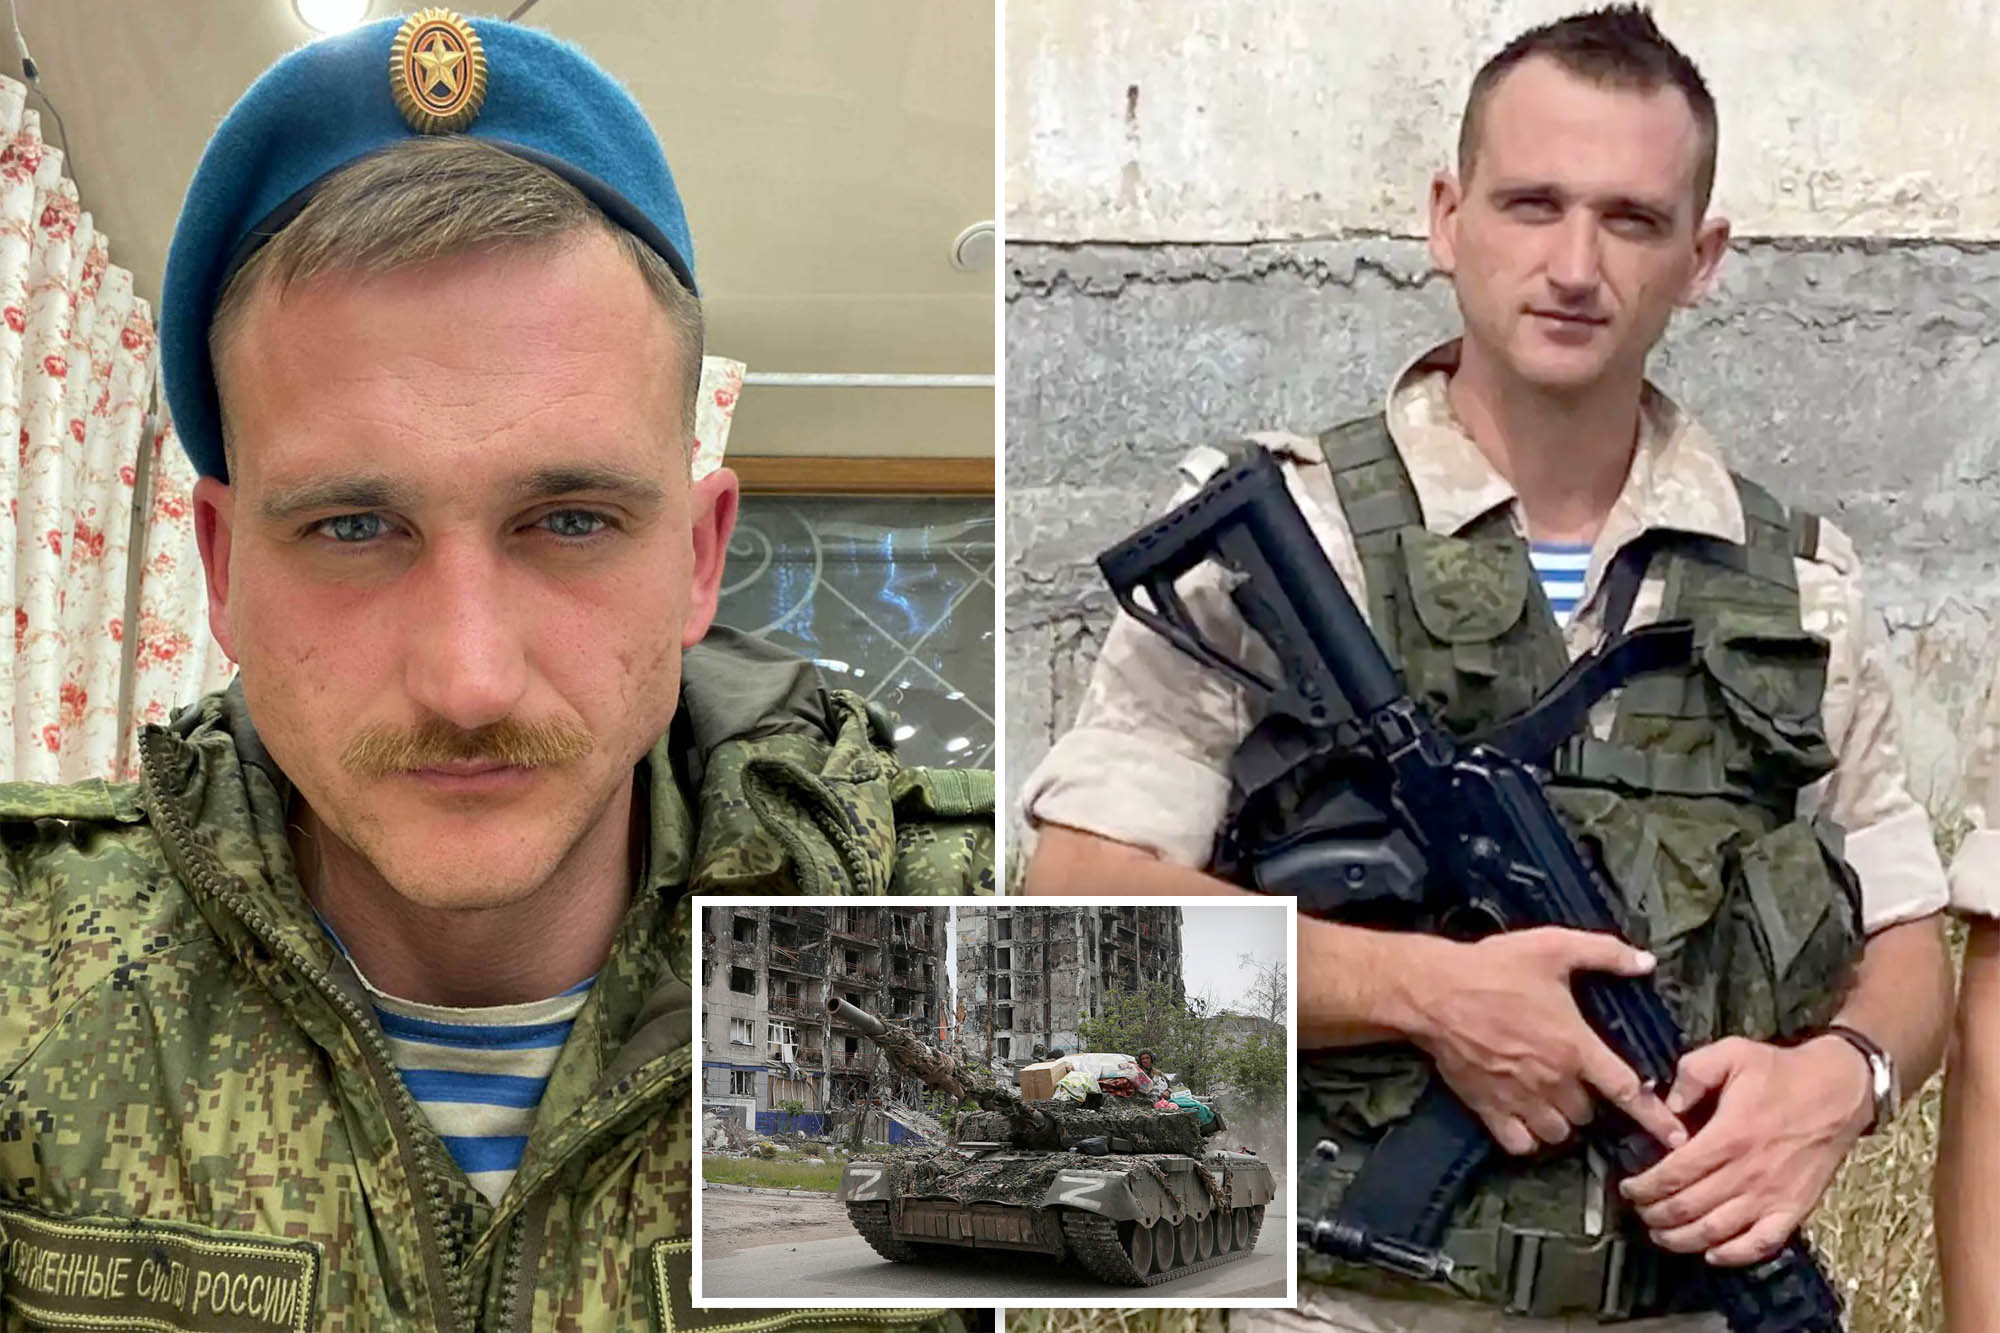 Russian paratrooper Pavel Filatyev (left and right) has published a 141-page memoir documenting his harrowing experiences fighting in Ukraine. His journal describes the Russian army being in disarray and lacking basic equipment and provisions while overseen by inept commanders.